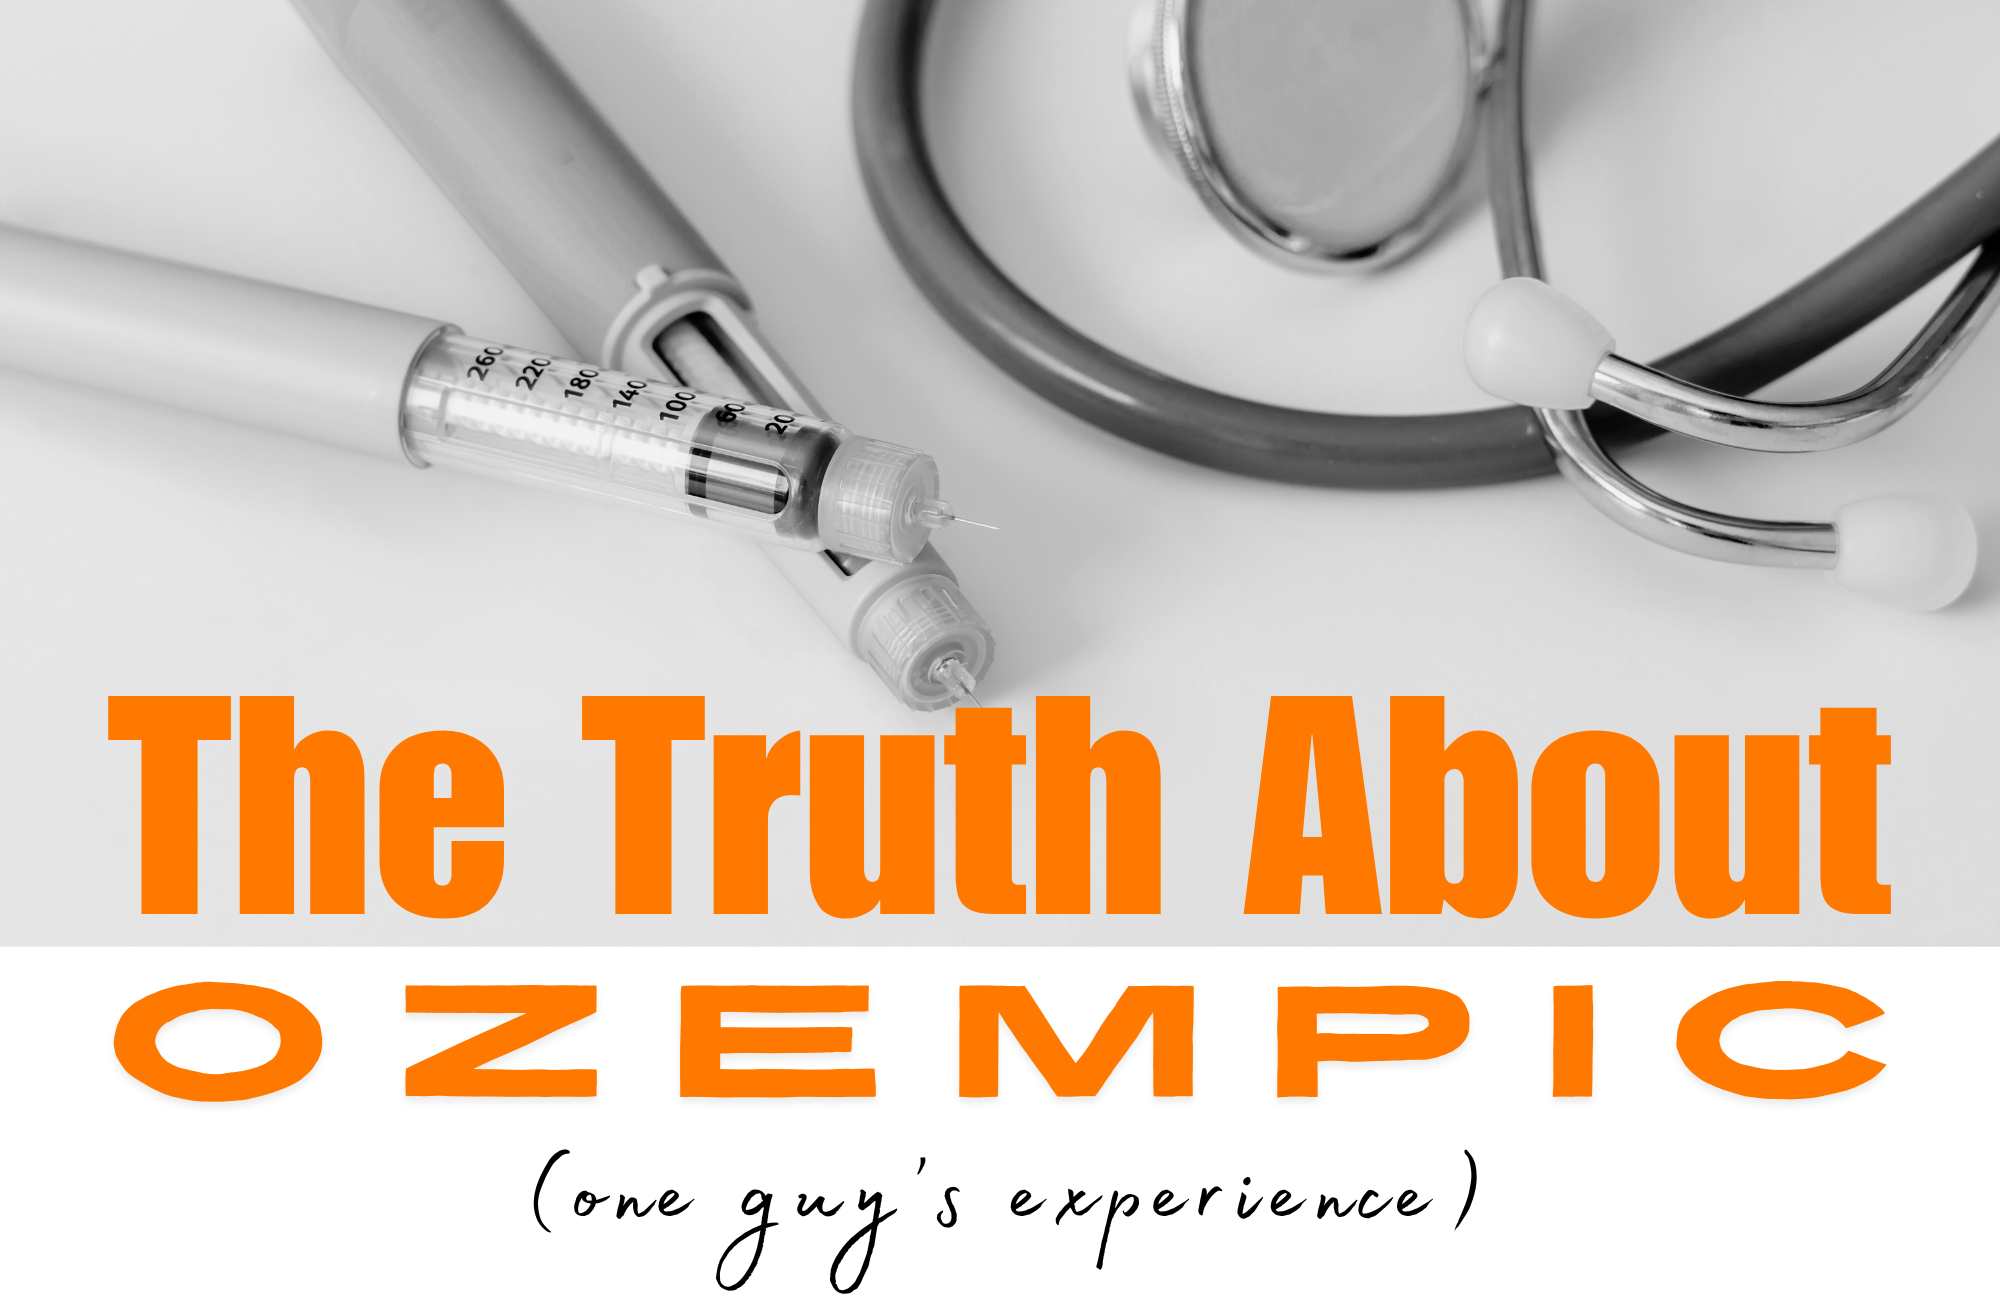 The Truth About Ozempic (one guy's experience)